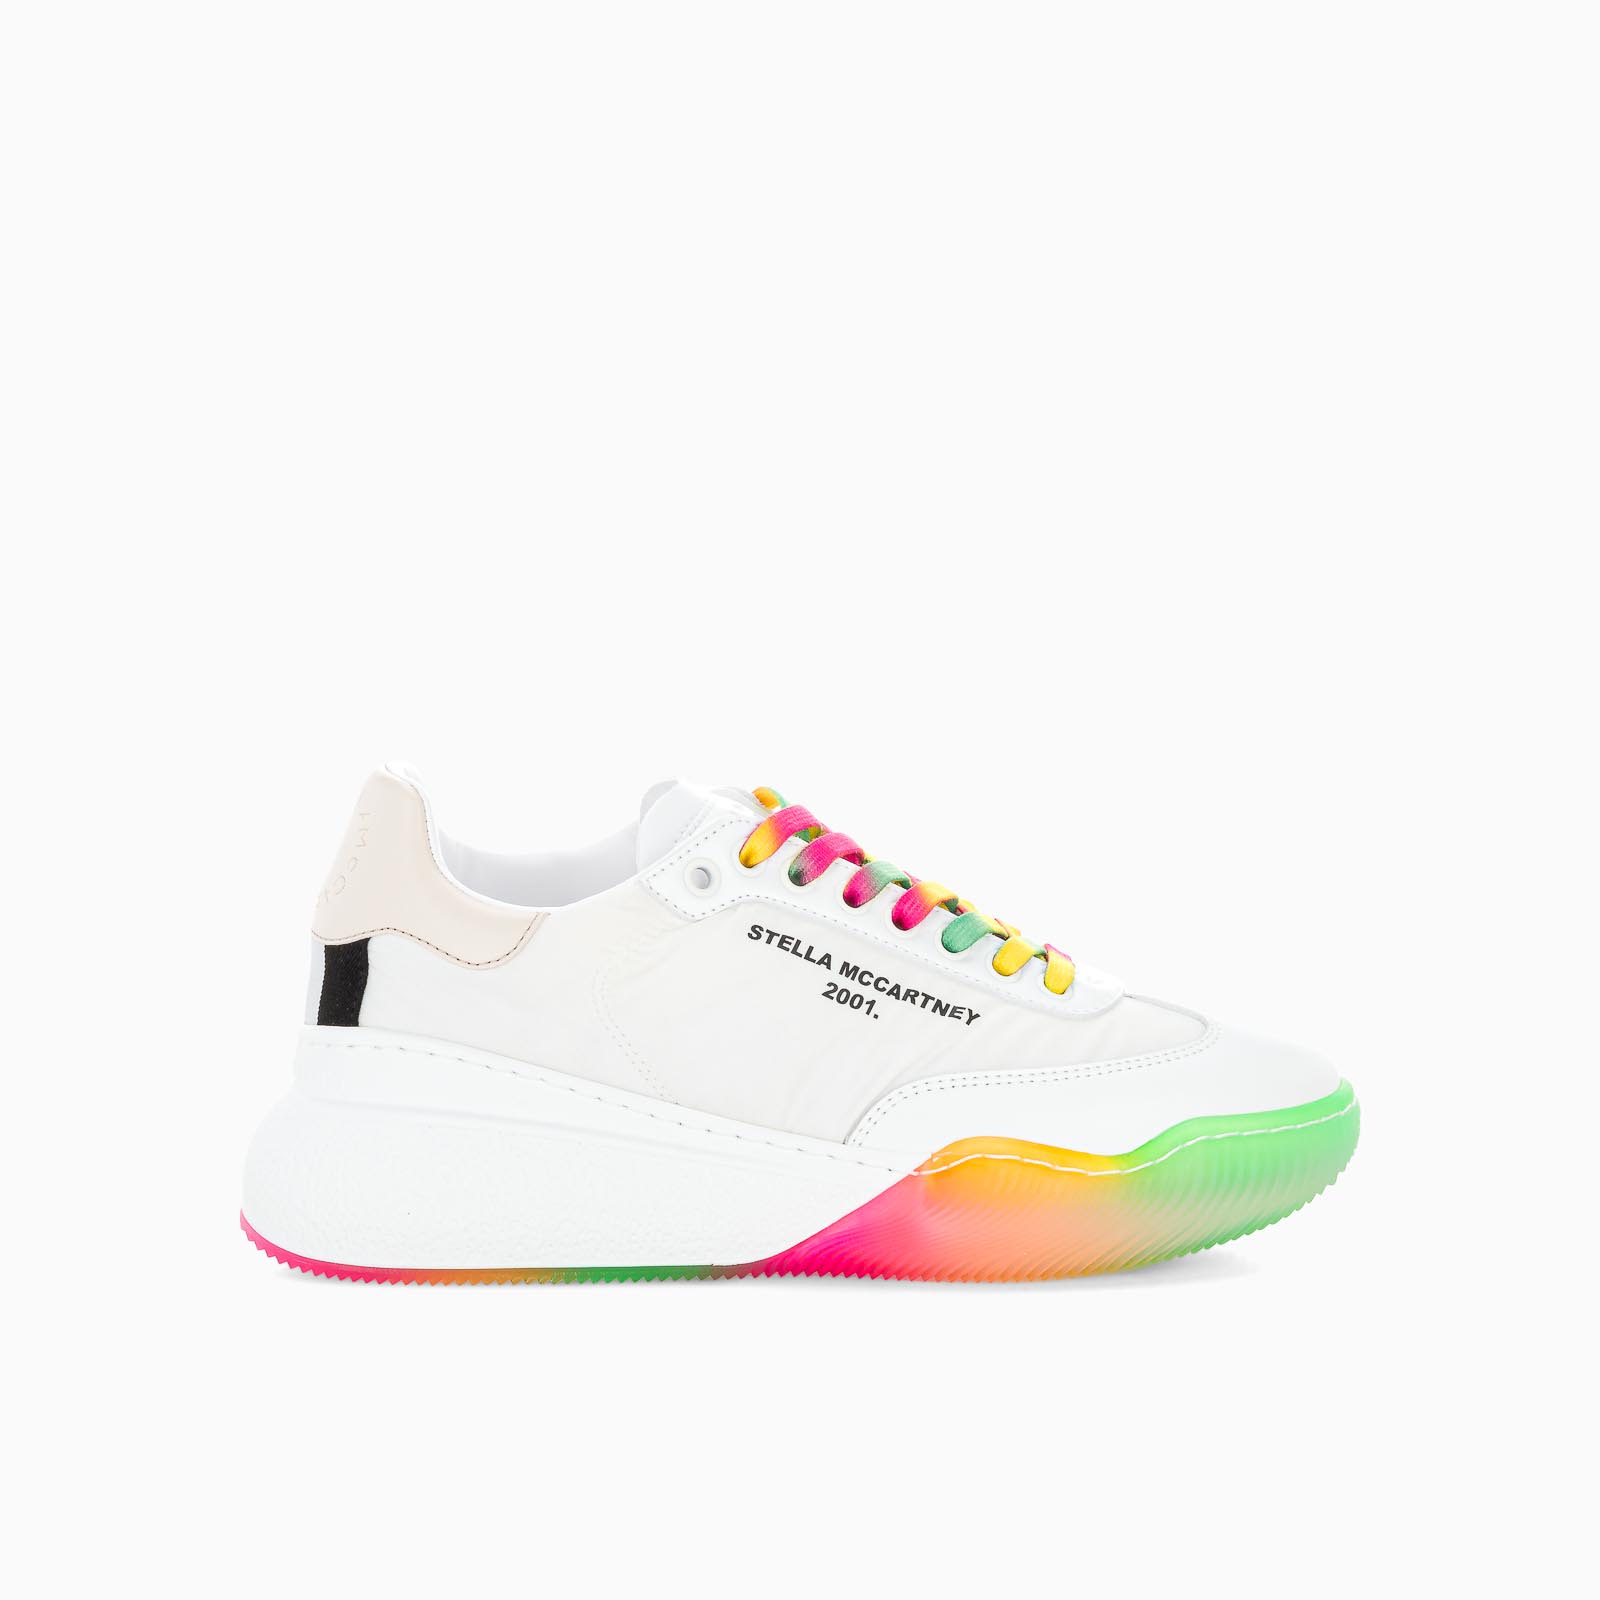 Buy Stella Mccartney White Multicolor Loop Lace-up Sneakers online, shop Stella McCartney shoes with free shipping